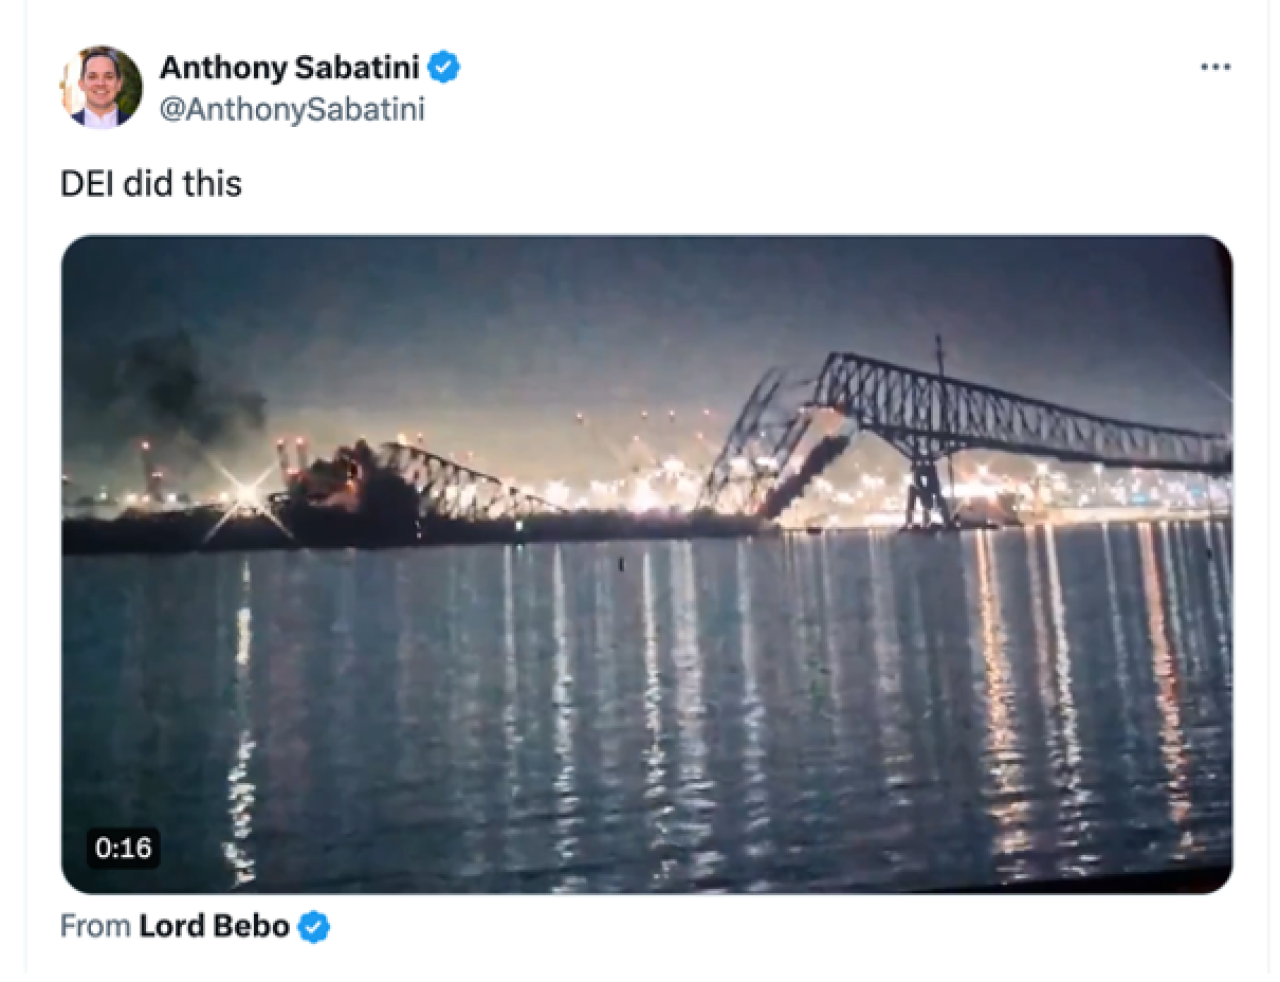 Anthony Sabatini post reads, "DEI did this" above a video clip of bridge collapse.